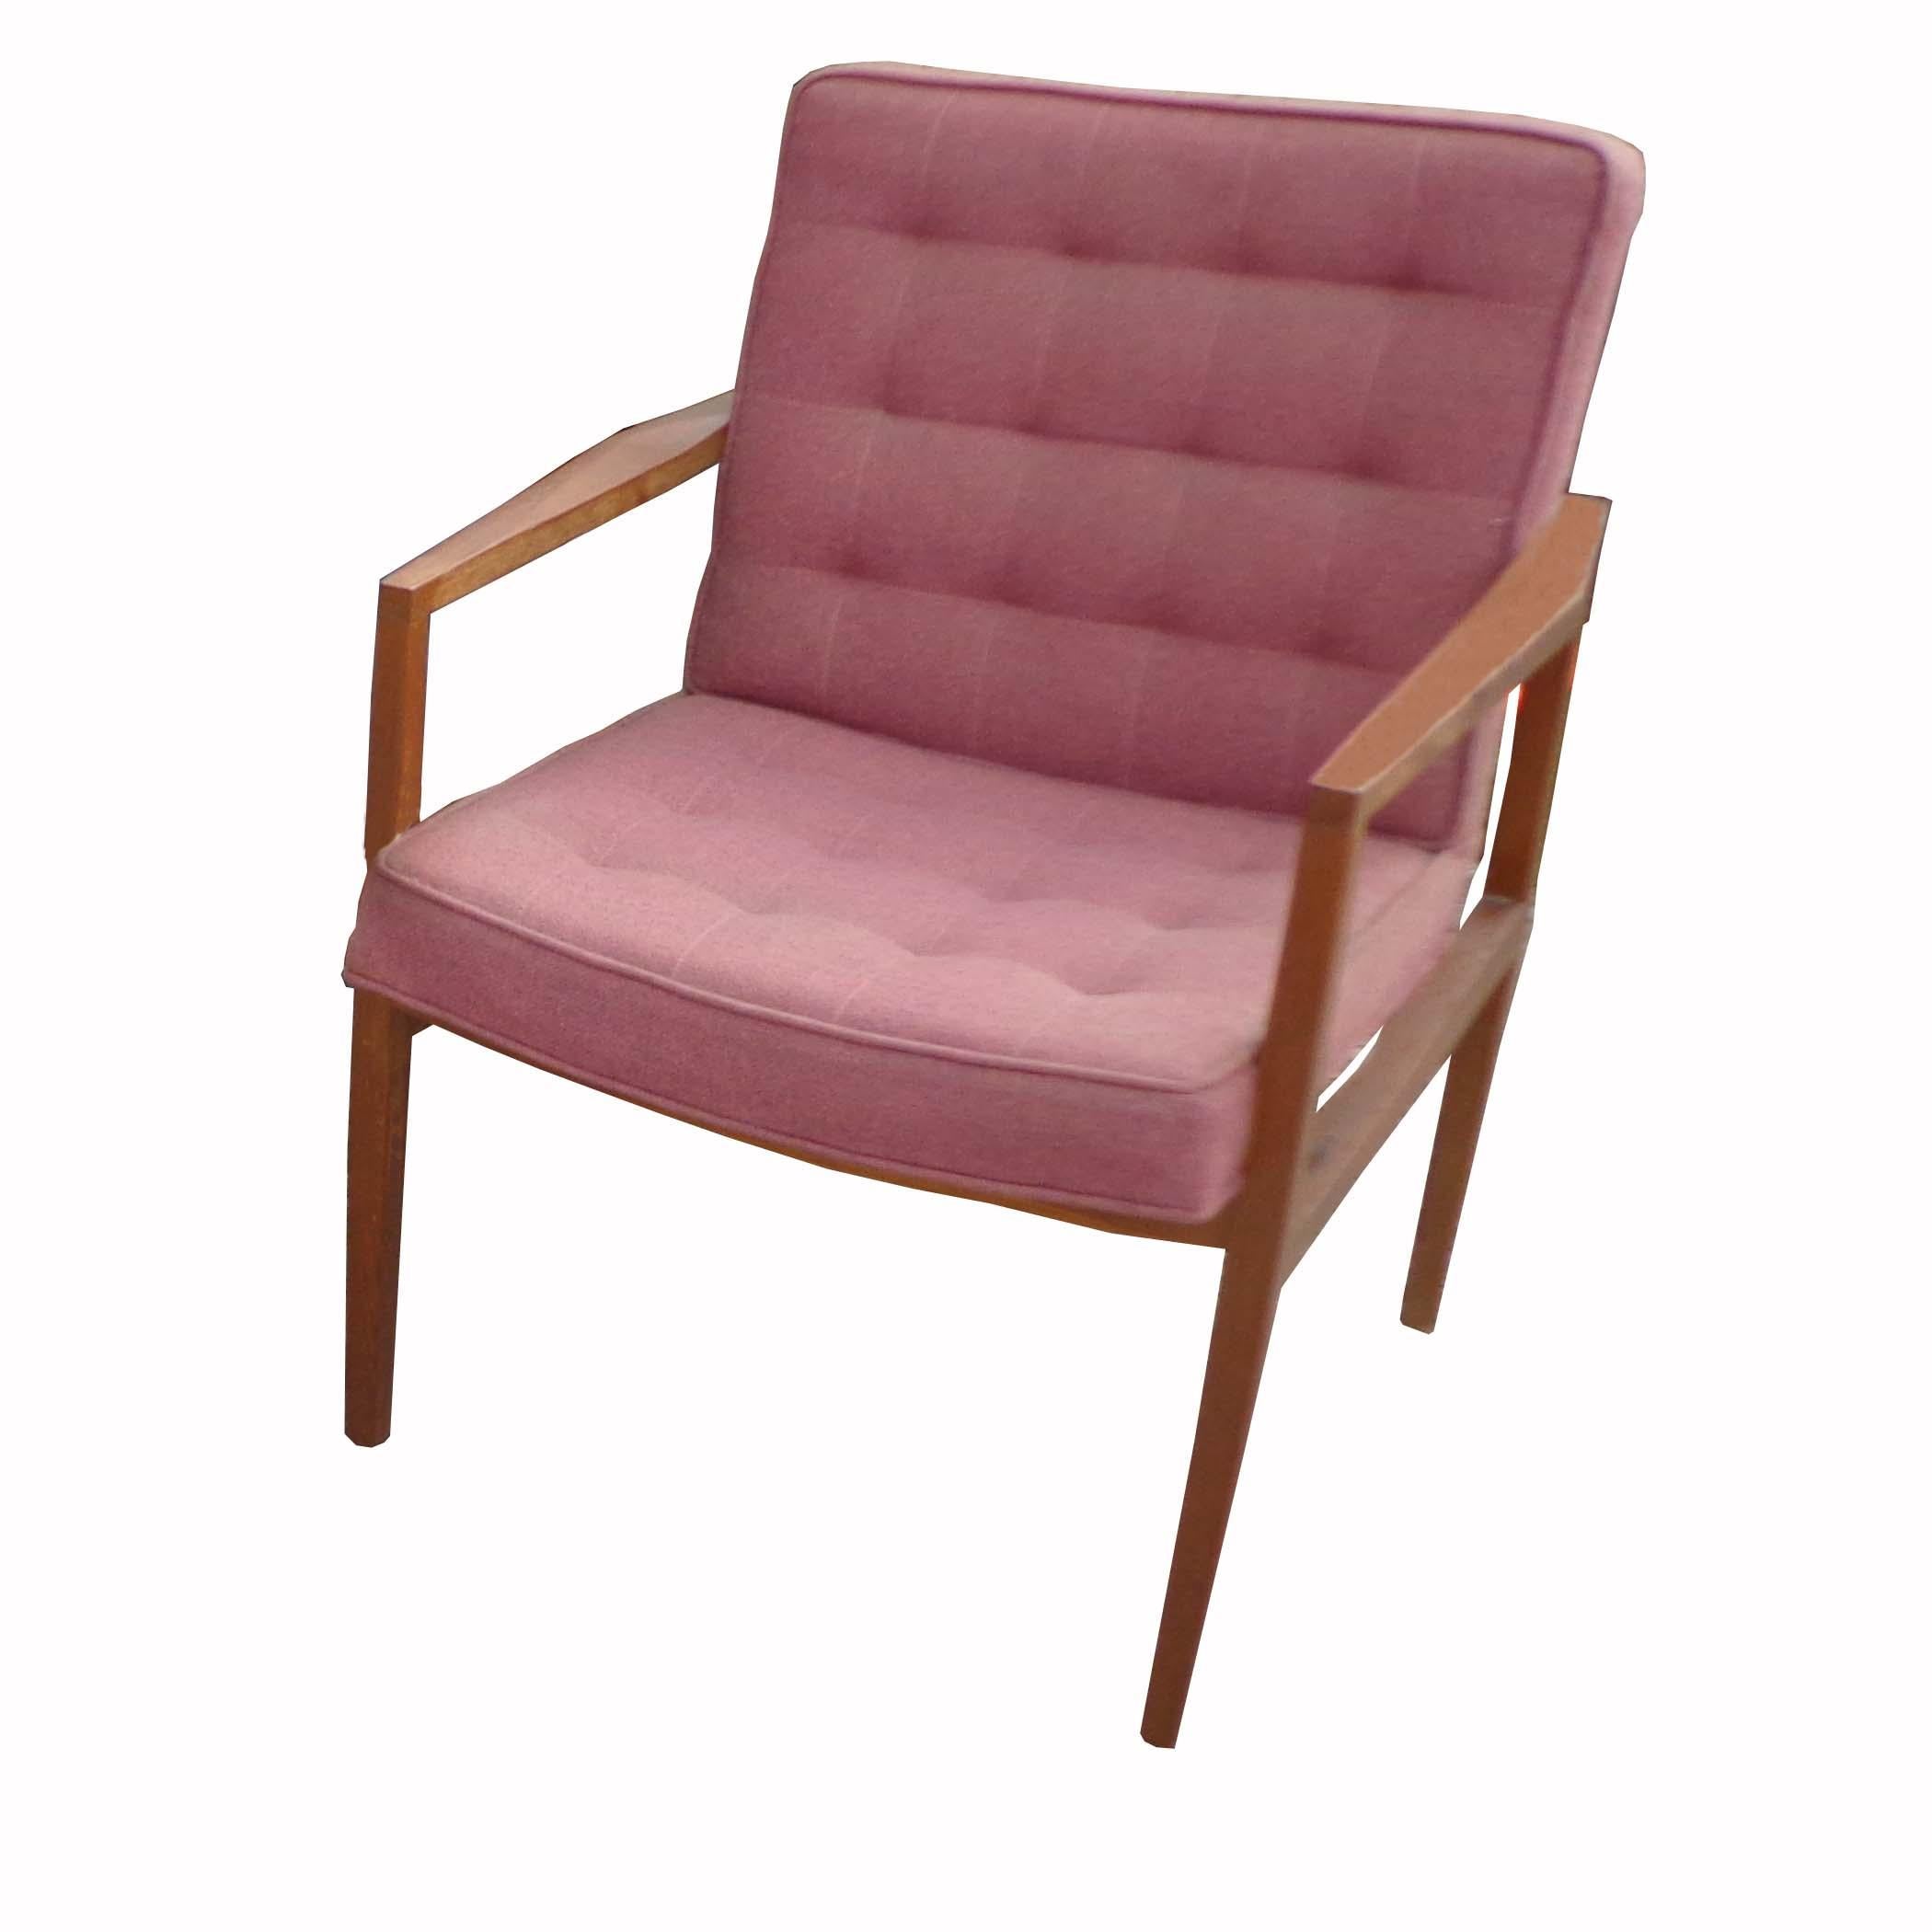 Knoll Cafiero lounge chair
1960s Design

Rare arm chair designed by Vincent Cafiero for Knoll featuring oak frame and classic Knoll tufting. 



We have other colors available. See photos.
Price is for (1) Please specify color when ordering.
Rose